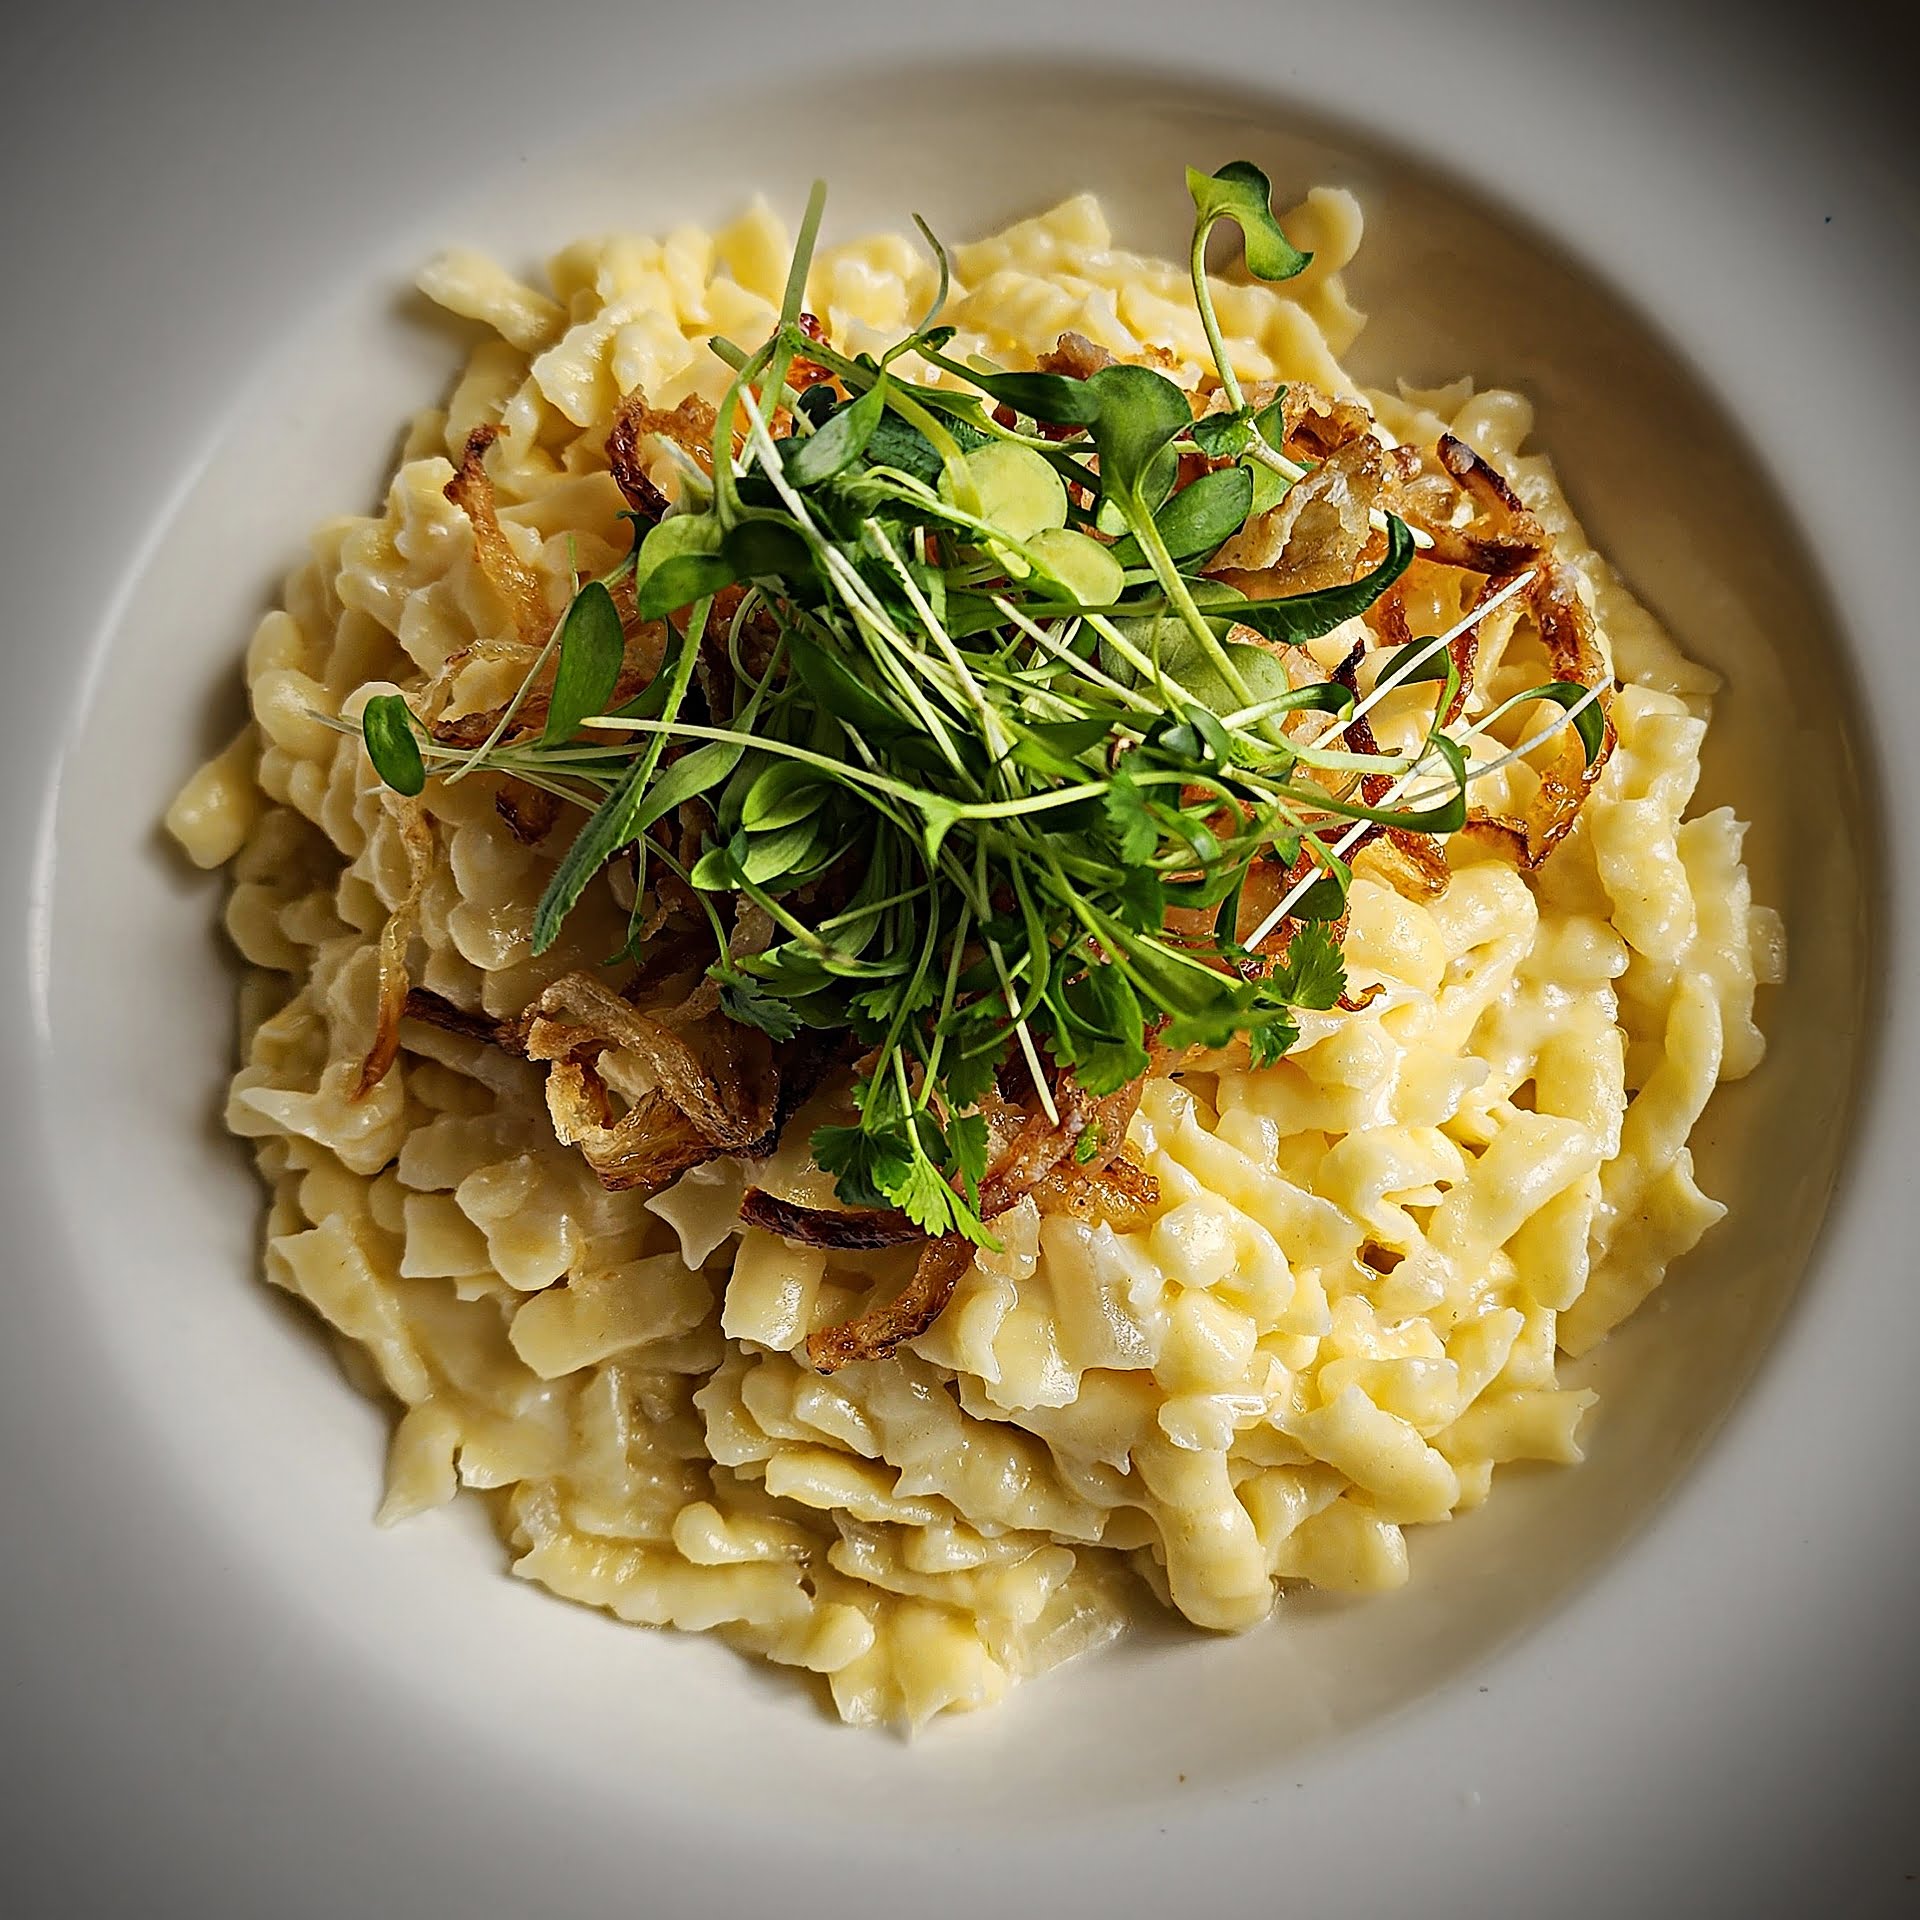 Cheese noodles at The Mule Cafe at Spinnerei in Leipzig via 360 MAGAZINE. 